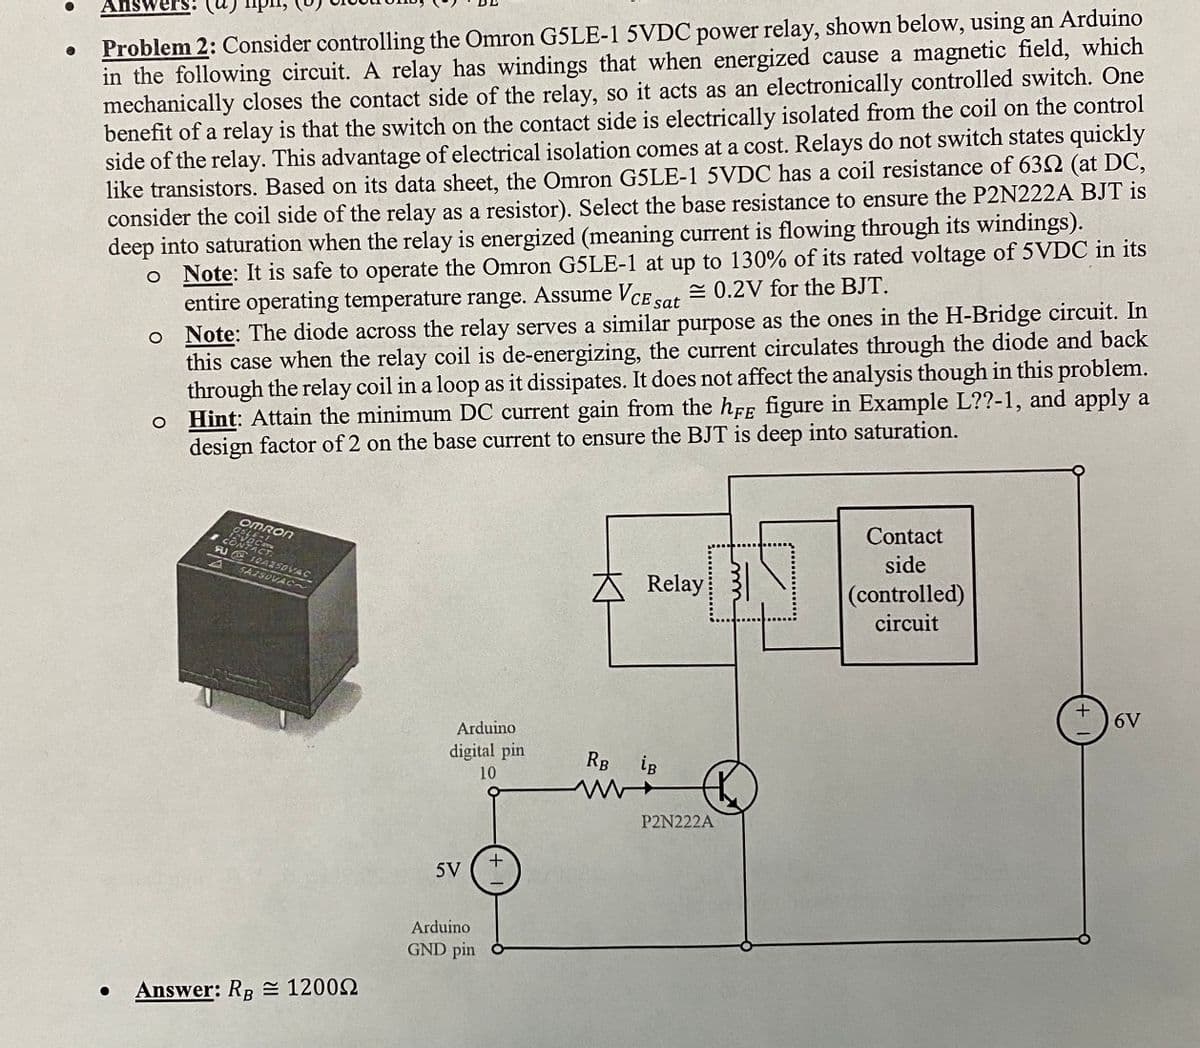 Answer
Problem 2: Consider controlling the Omron G5LE-1 5VDC power relay, shown below, using an Arduino
in the following circuit. A relay has windings that when energized cause a magnetic field, which
mechanically closes the contact side of the relay, so it acts as an electronically controlled switch. One
benefit of a relay is that the switch on the contact side is electrically isolated from the coil on the control
side of the relay. This advantage of electrical isolation comes at a cost. Relays do not switch states quickly
like transistors. Based on its data sheet, the Omron G5LE-1 5VDC has a coil resistance of 632 (at DC,
consider the coil side of the relay as a resistor). Select the base resistance to ensure the P2N222A BJT is
deep into saturation when the relay is energized (meaning current is flowing through its windings).
o Note: It is safe to operate the Omron G5LE-1 at up to 130% of its rated voltage of 5VDC in its
= 0.2V for the BJT.
entire operating temperature range. Assume VcE sat
o Note: The diode across the relay serves a similar purpose as the ones in the H-Bridge circuit. In
this case when the relay coil is de-energizing, the current circulates through the diode and back
through the relay coil in a loop as it dissipates. It does not affect the analysis though in this problem.
o Hint: Attain the minimum DC current gain from the hFF figure in Example L??-1, and apply a
design factor of 2 on the base current to ensure the BJT is deep into saturation.
OMRON
Contact
FU E1CA250VAC
side
SA2SDVAC~
Relay 3
(controlled)
circuit
6V
Arduino
digital pin
RB
ig
10
P2N222A
5V
Arduino
GND pin ở
Answer: RB = 12002
